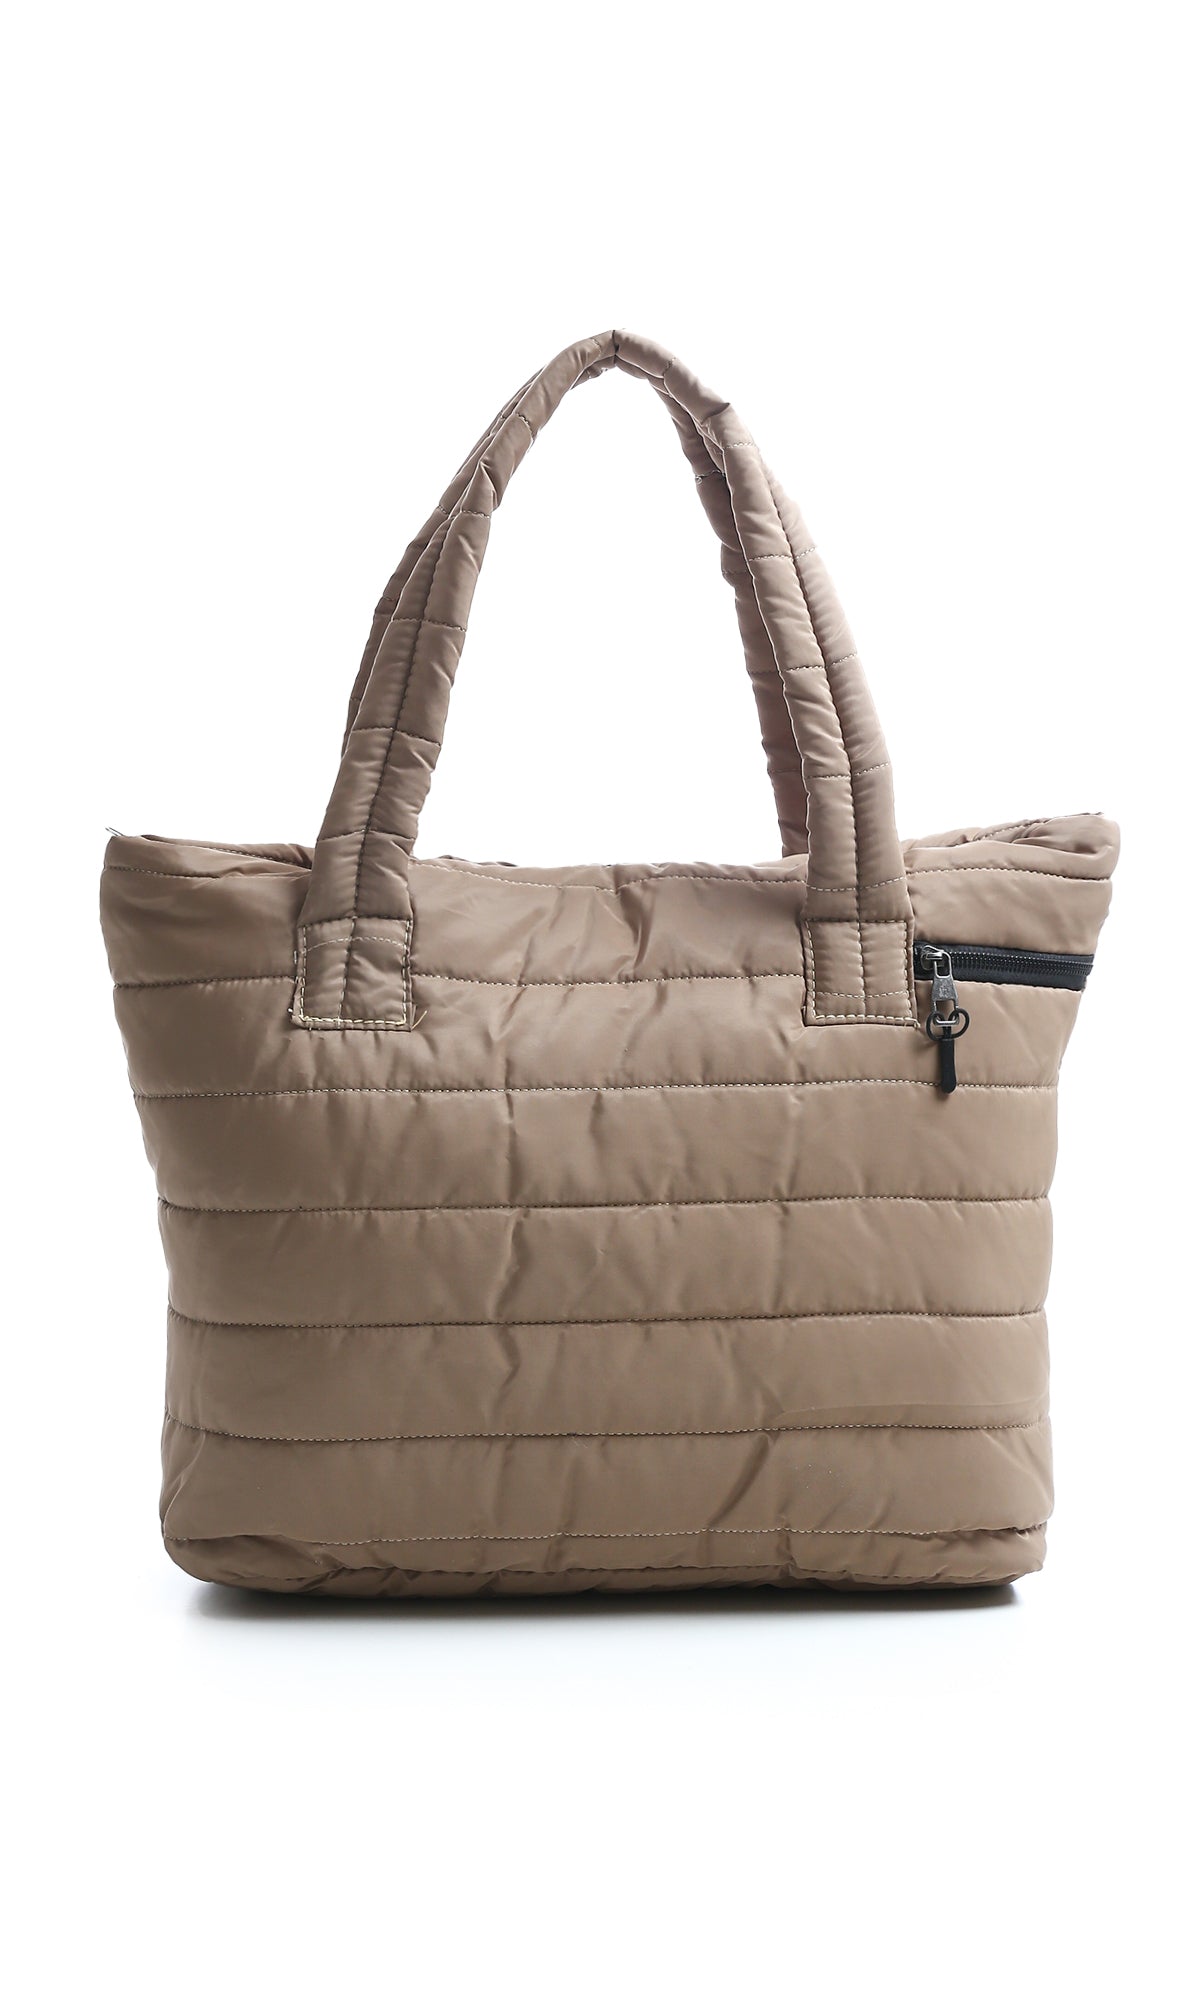 O181884 Zipped Casual Dark Beige Quilted Hand-Bag